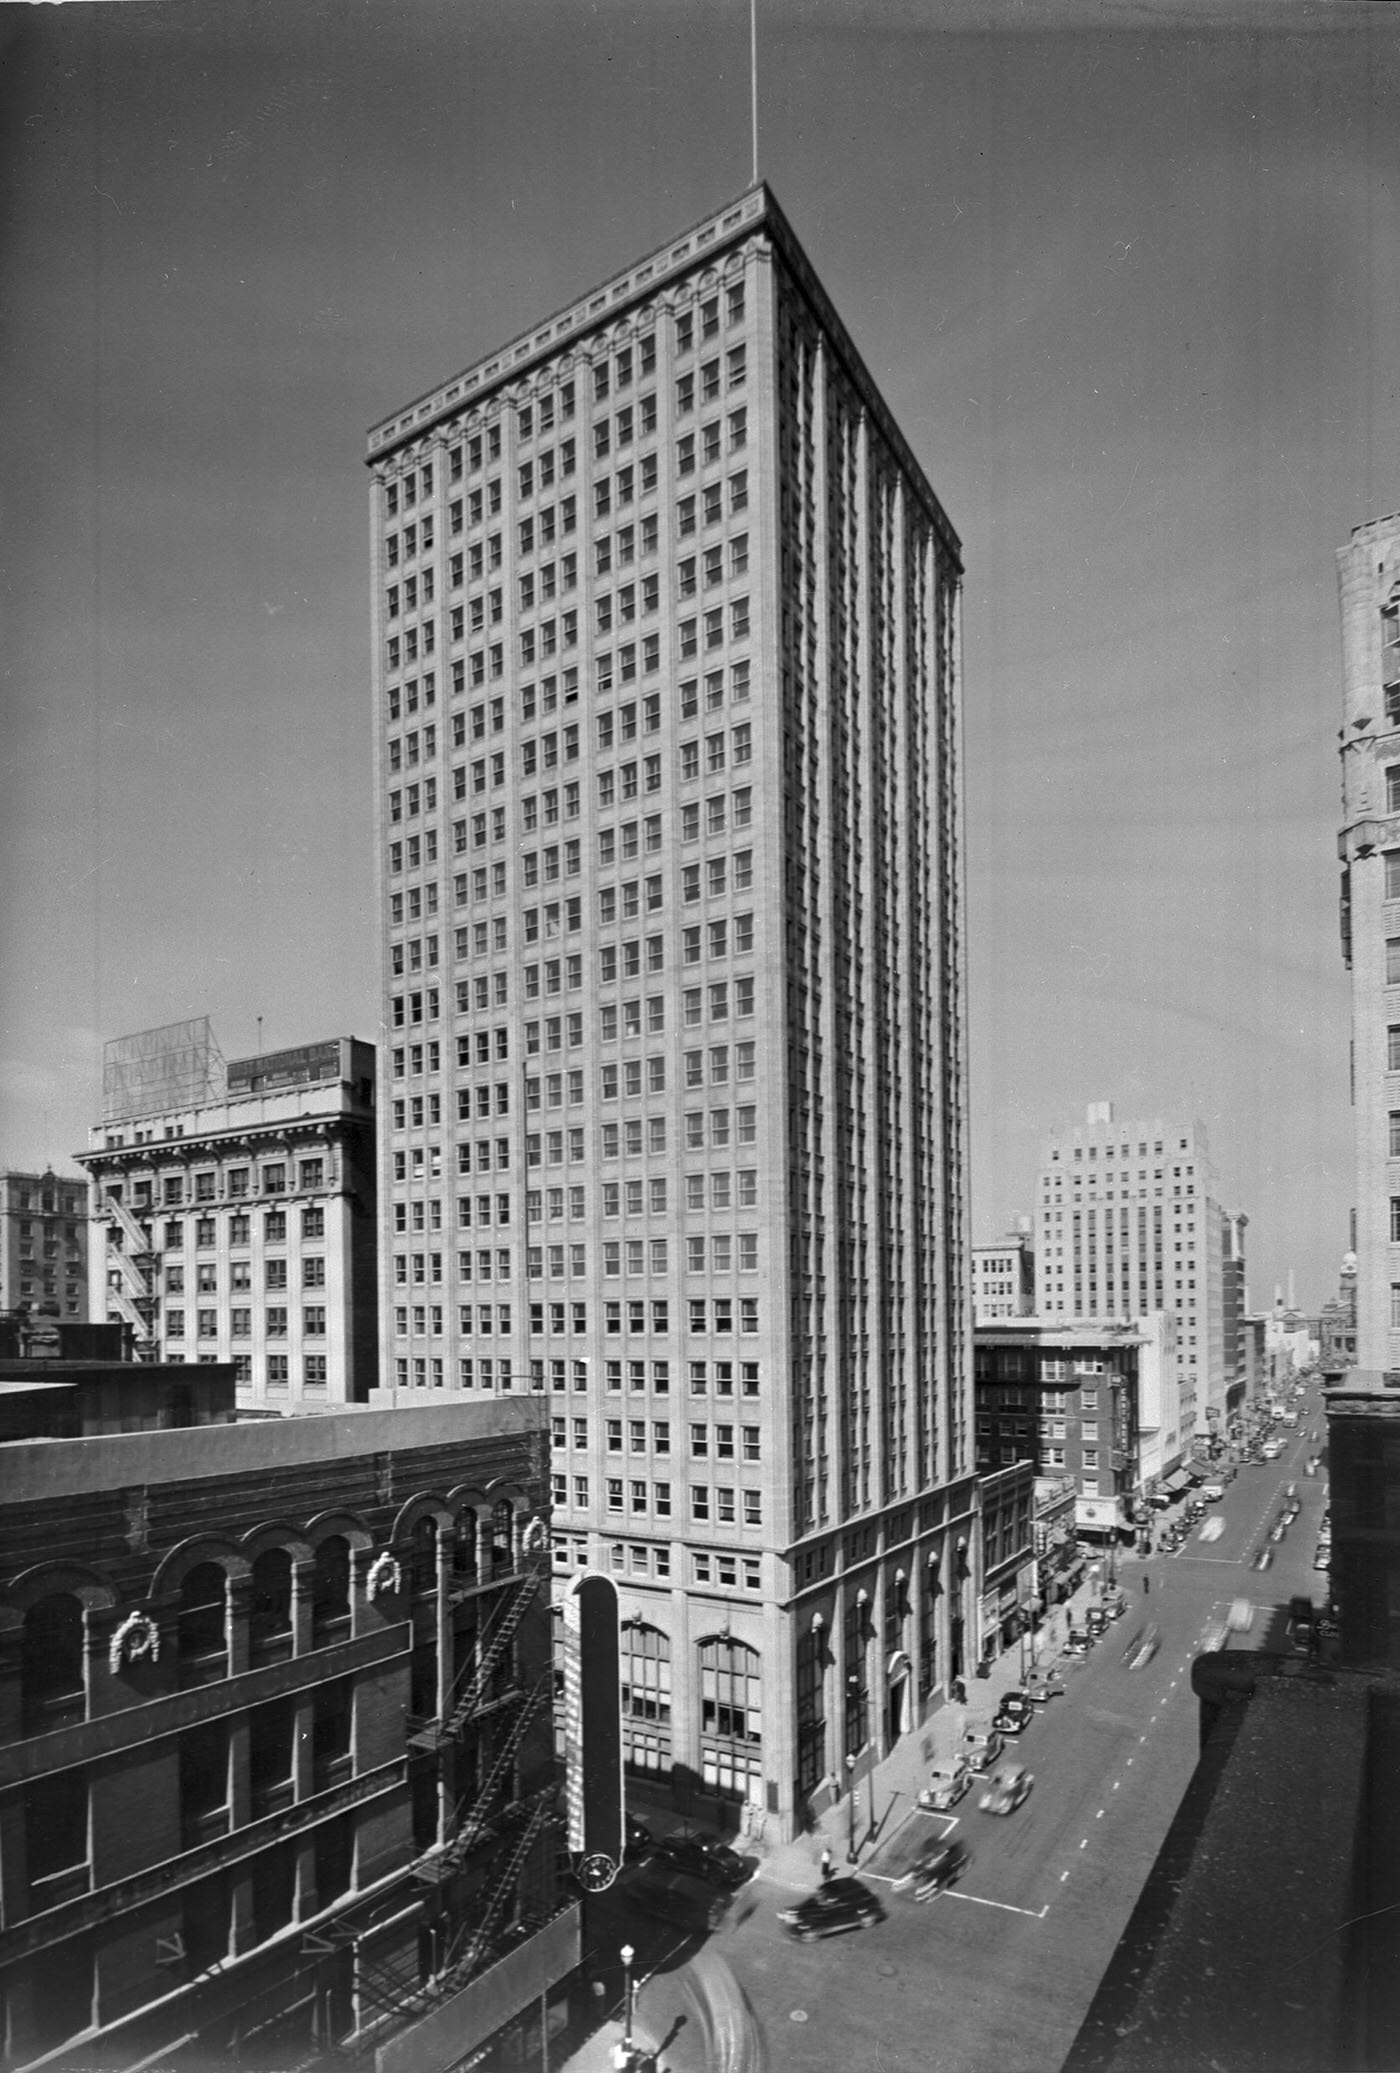 Fort Worth National Bank, 714 Main Street, Fort Worth, Texas, 1942